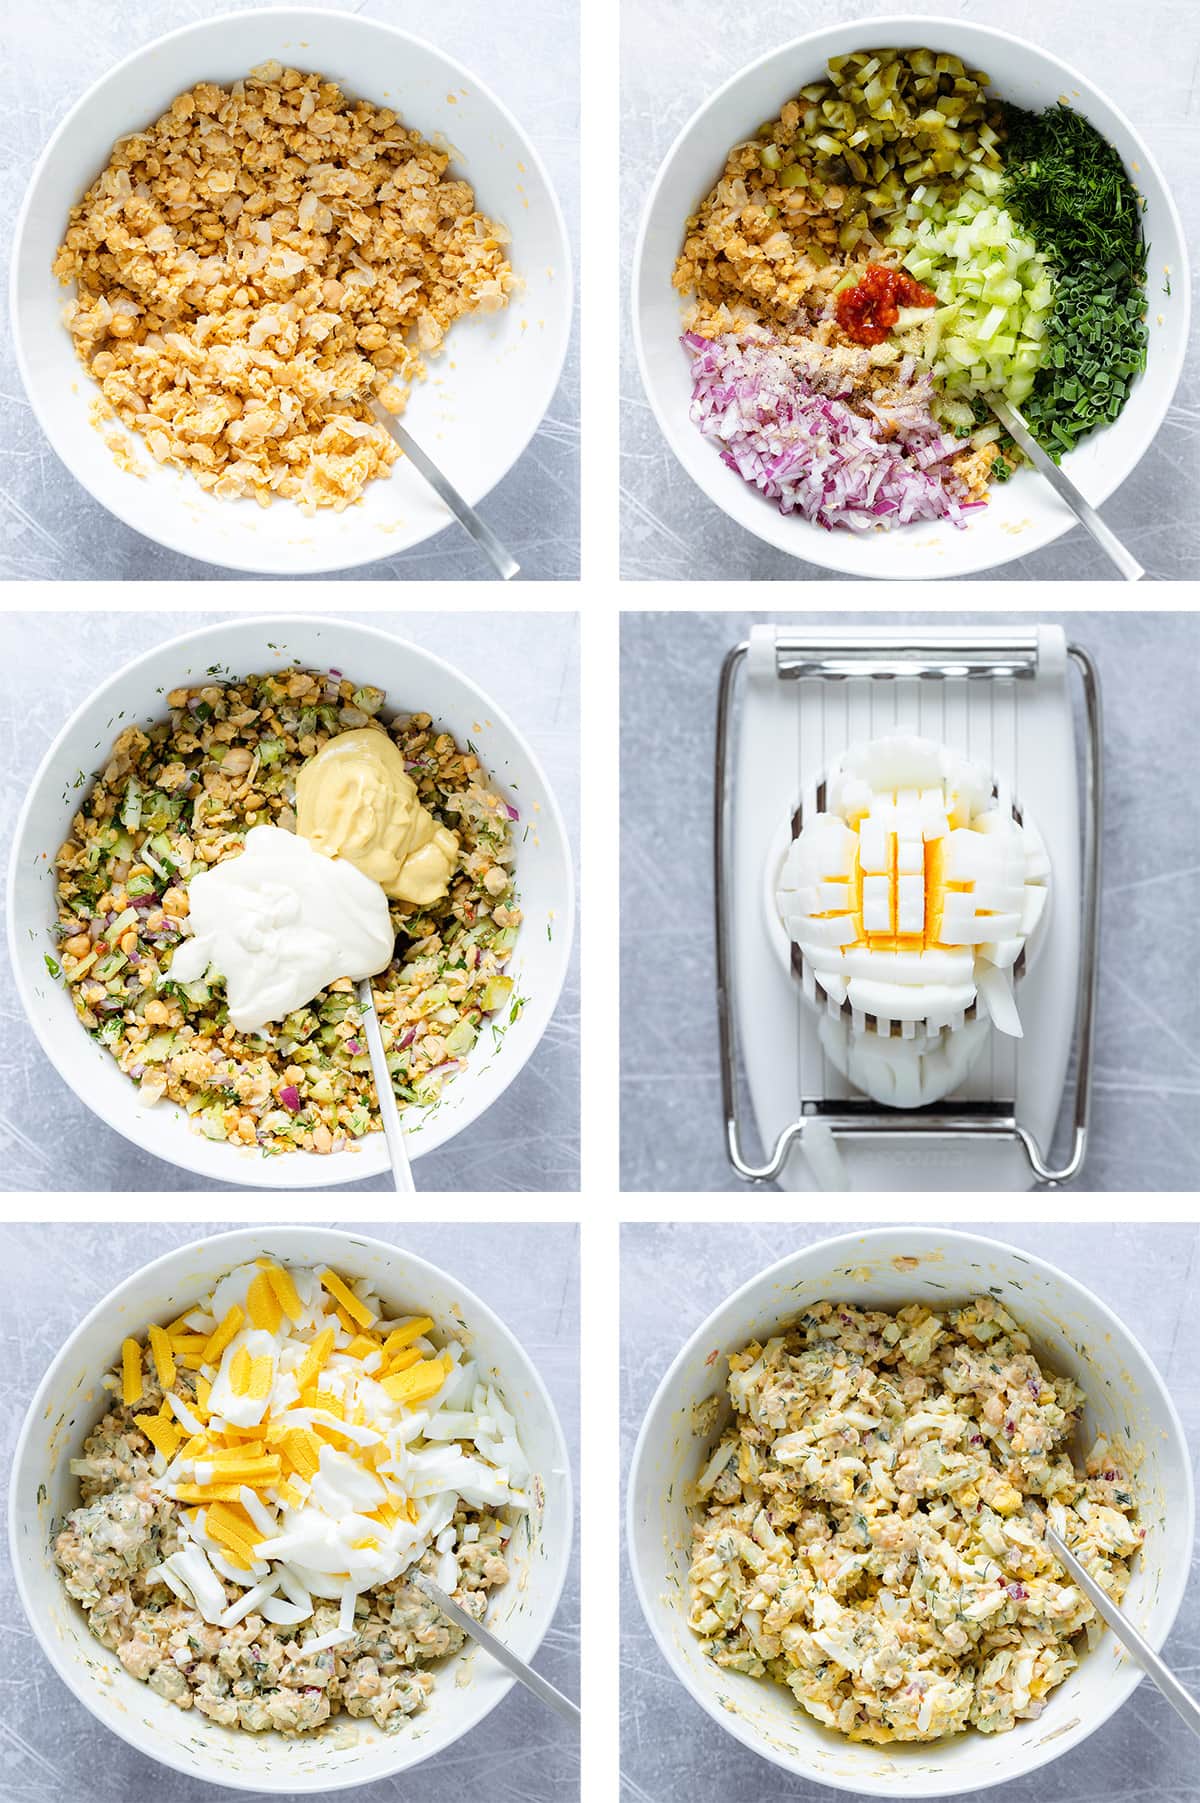 Six photos showing how to make chickpea egg salad from mashing chickpeas to adding all ingredients and mixing.